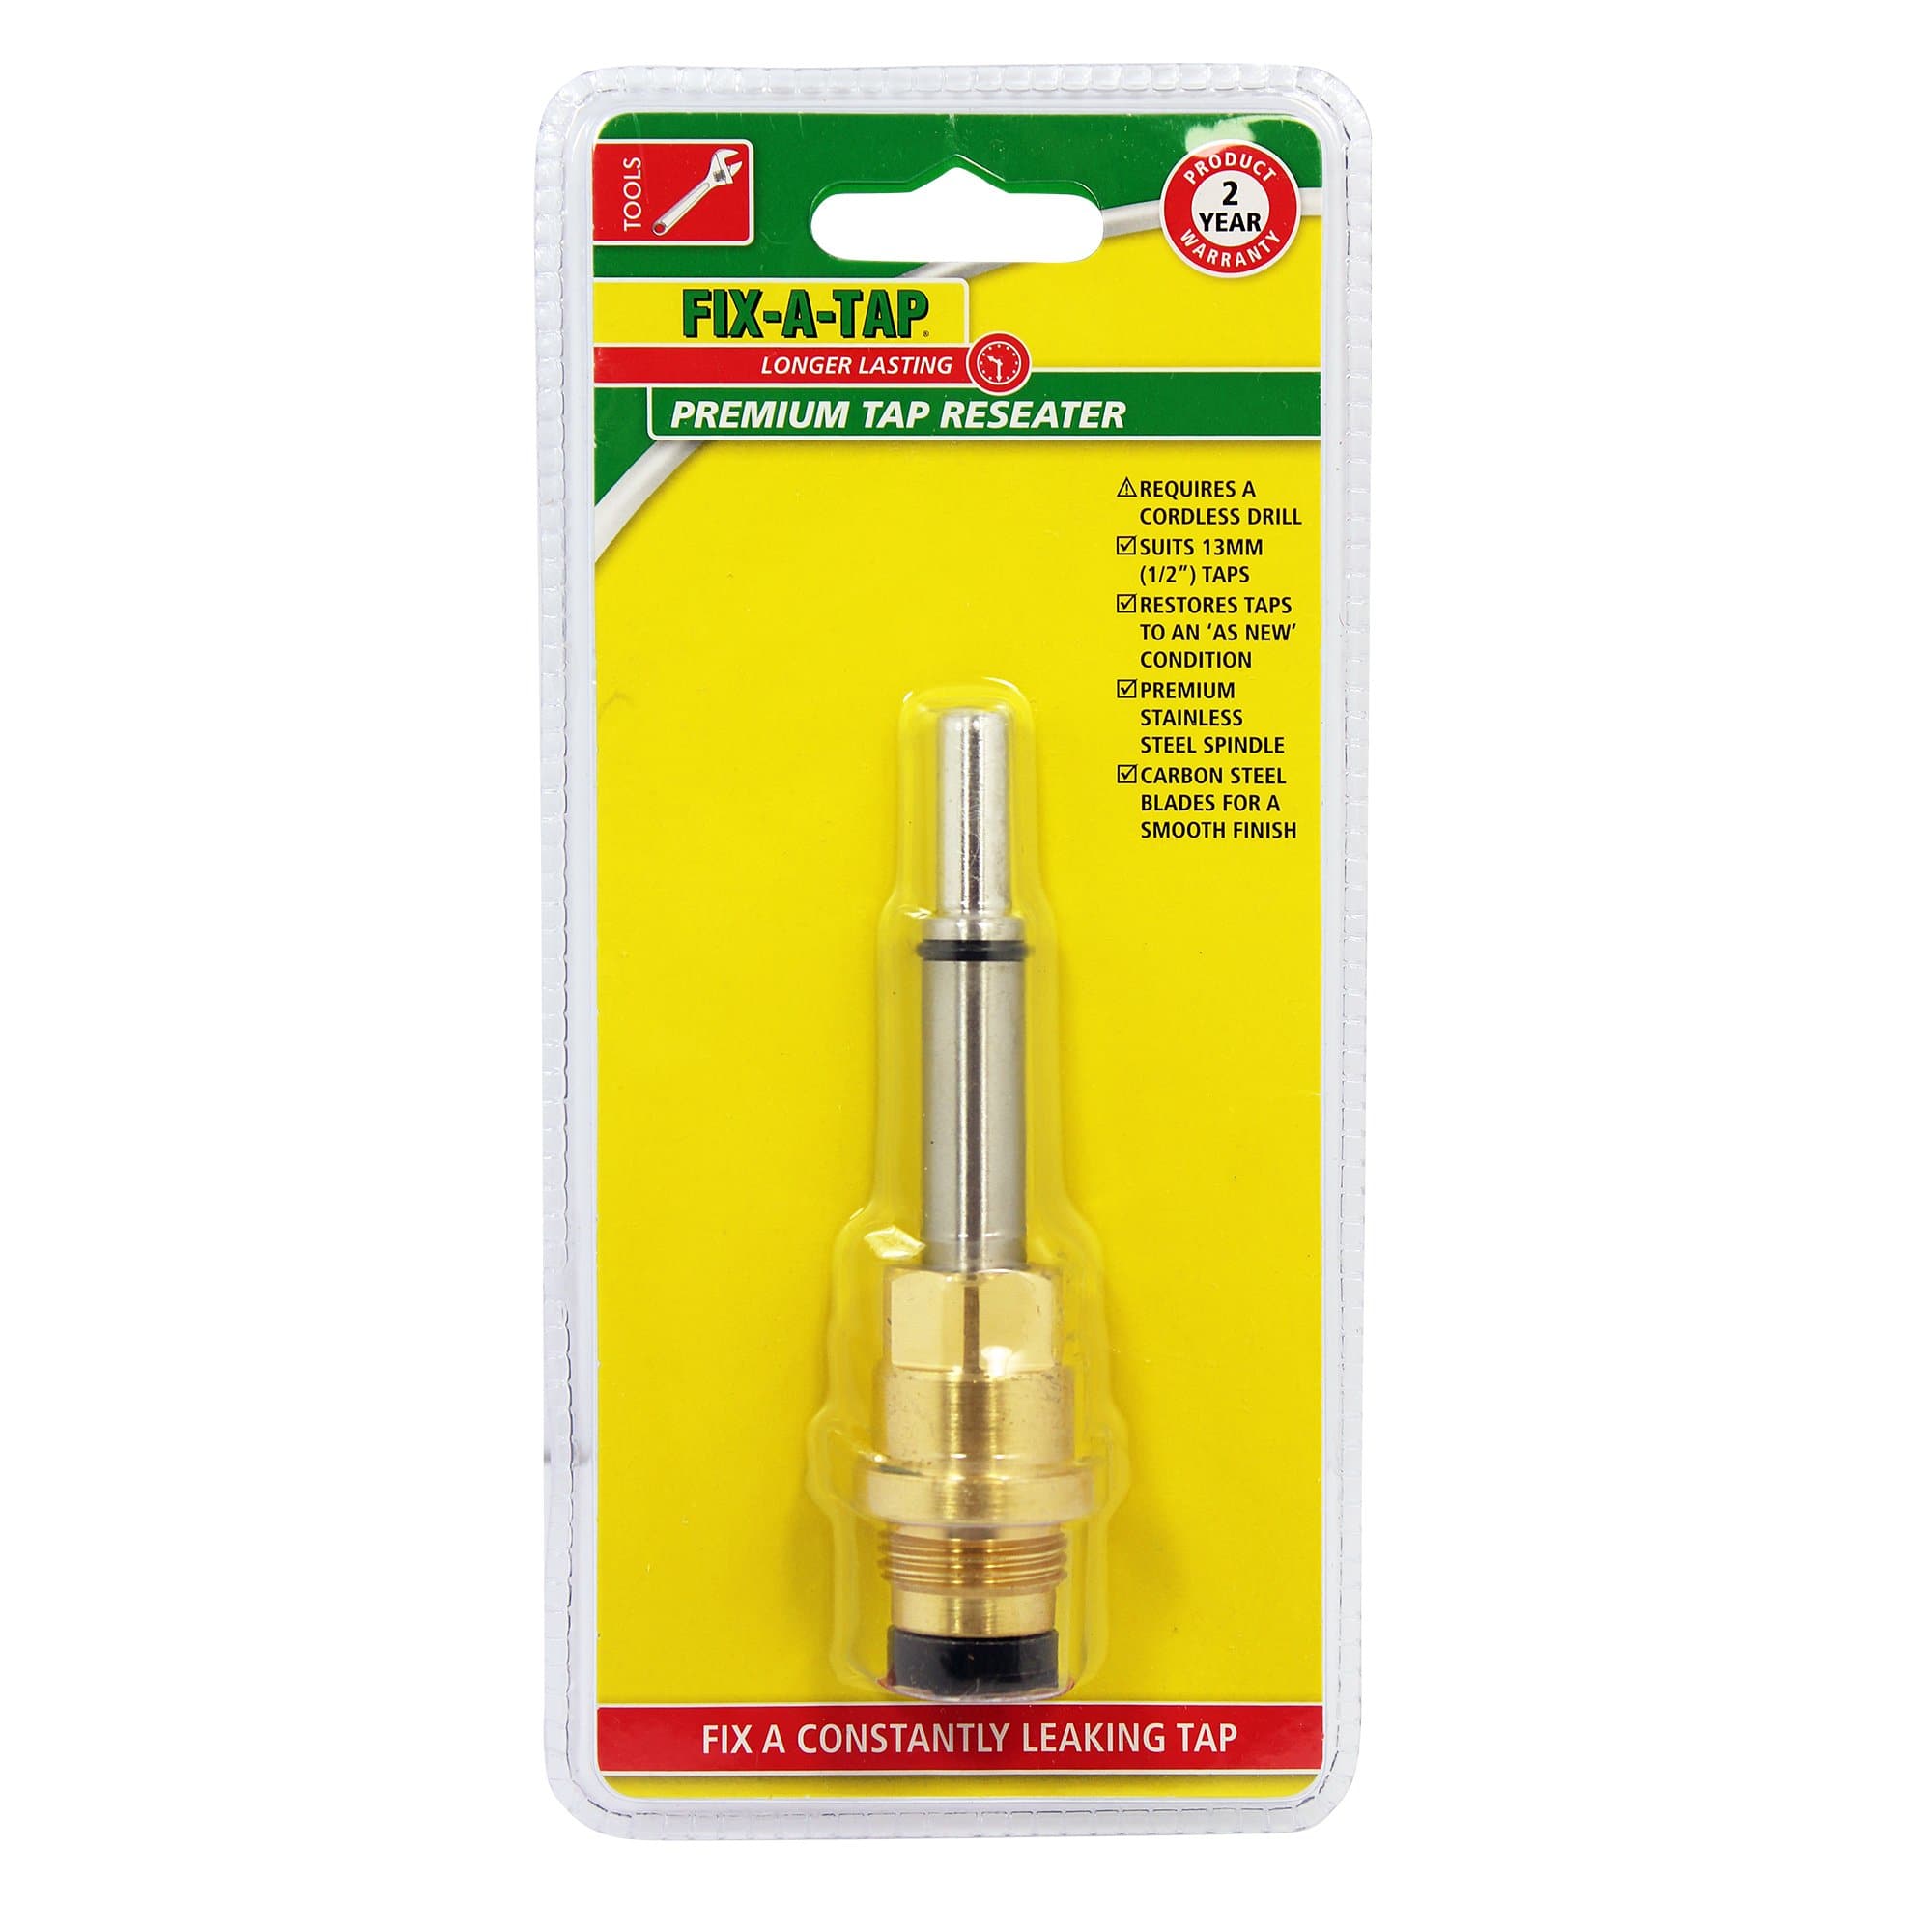 FIX-A-TAP Premium Tap Reseater Suits 13mm (1/2") taps. 230225 - Double Bay Hardware